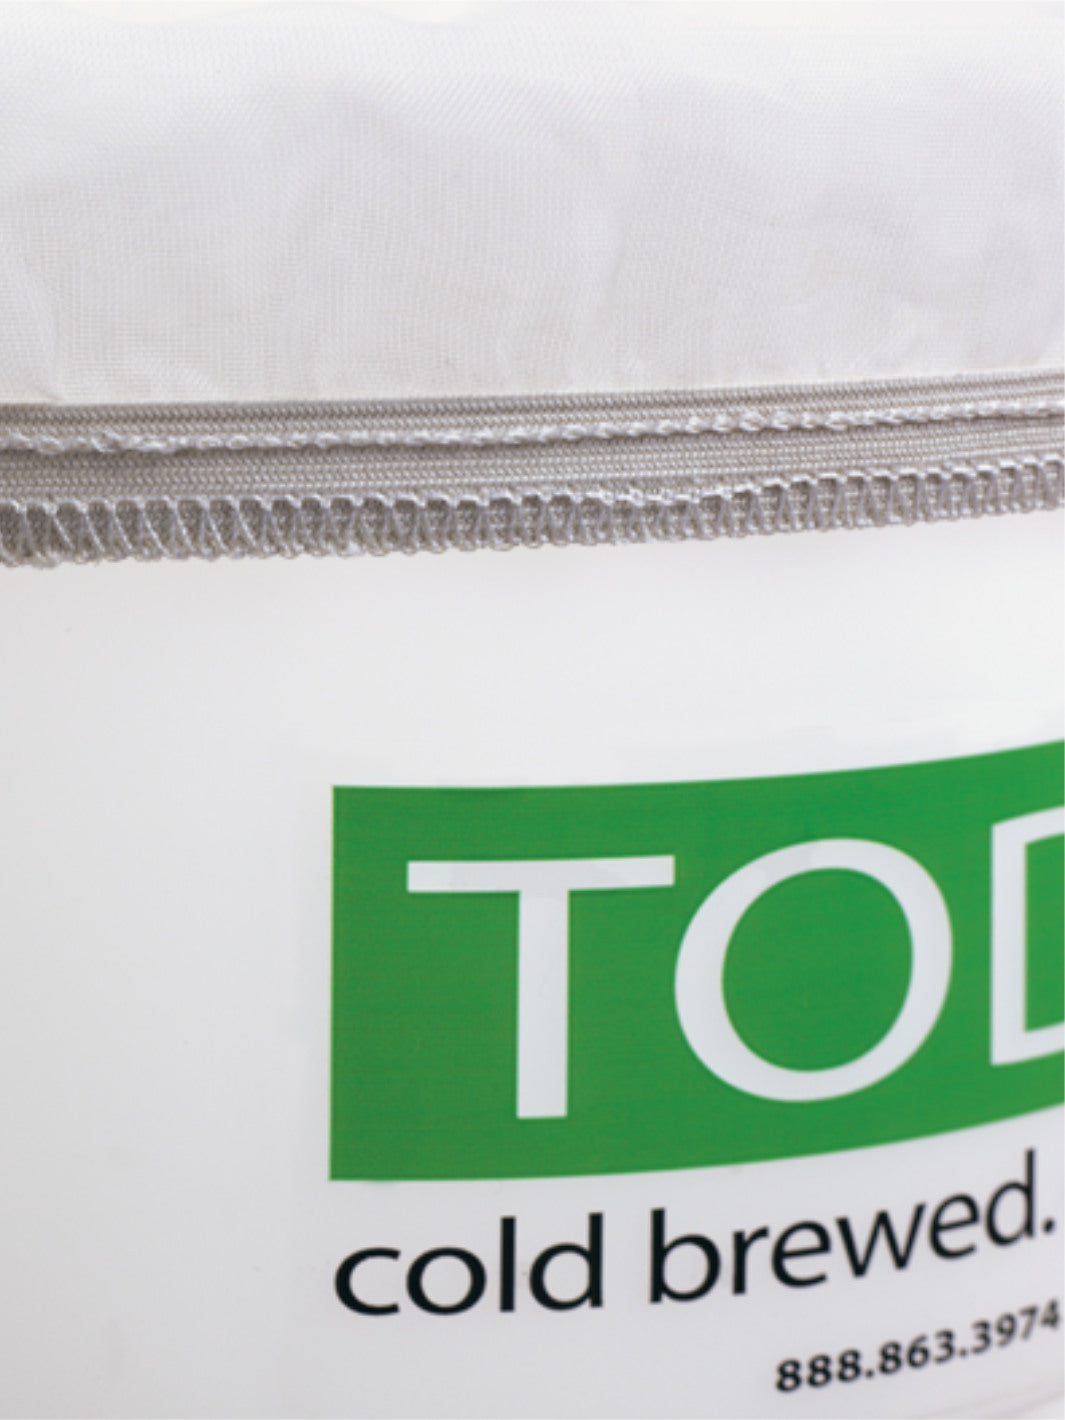 TODDY Commercial Model Strainer